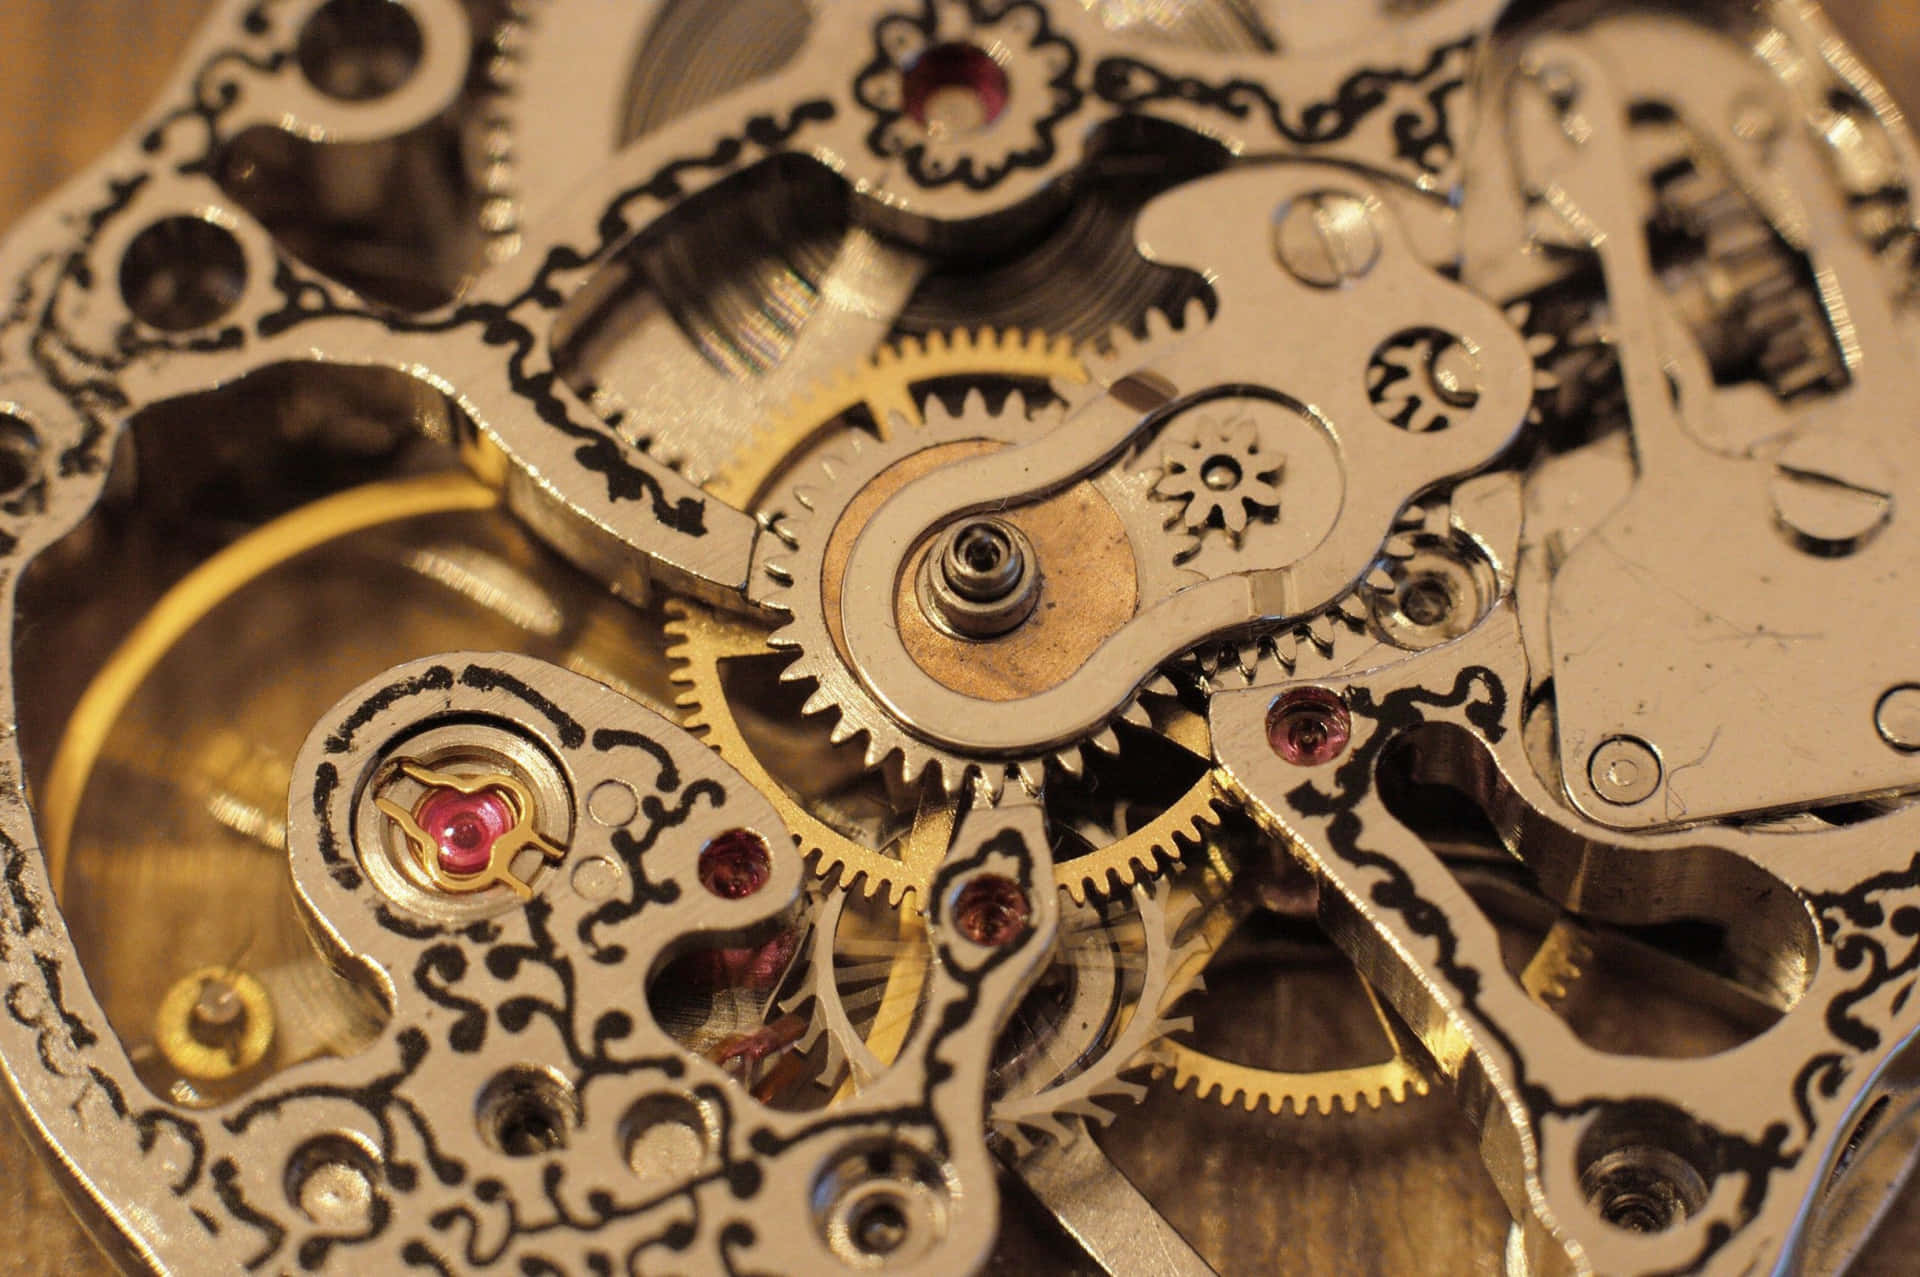 A view of intricately designed clocks